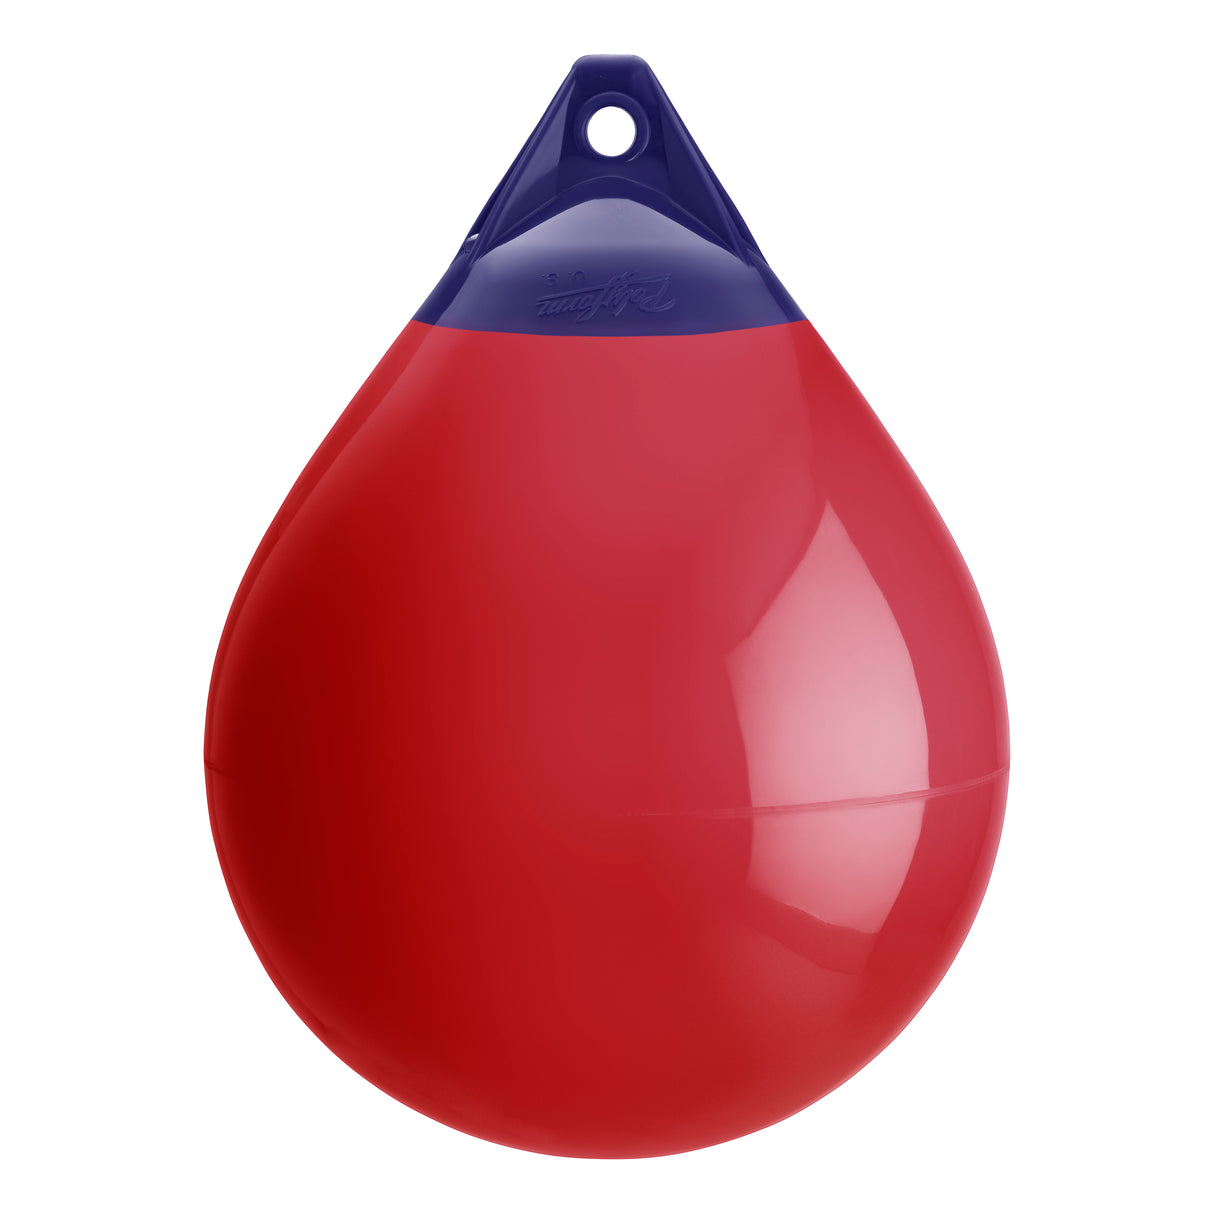 Classic Red inflatable buoy, Polyform A-4 